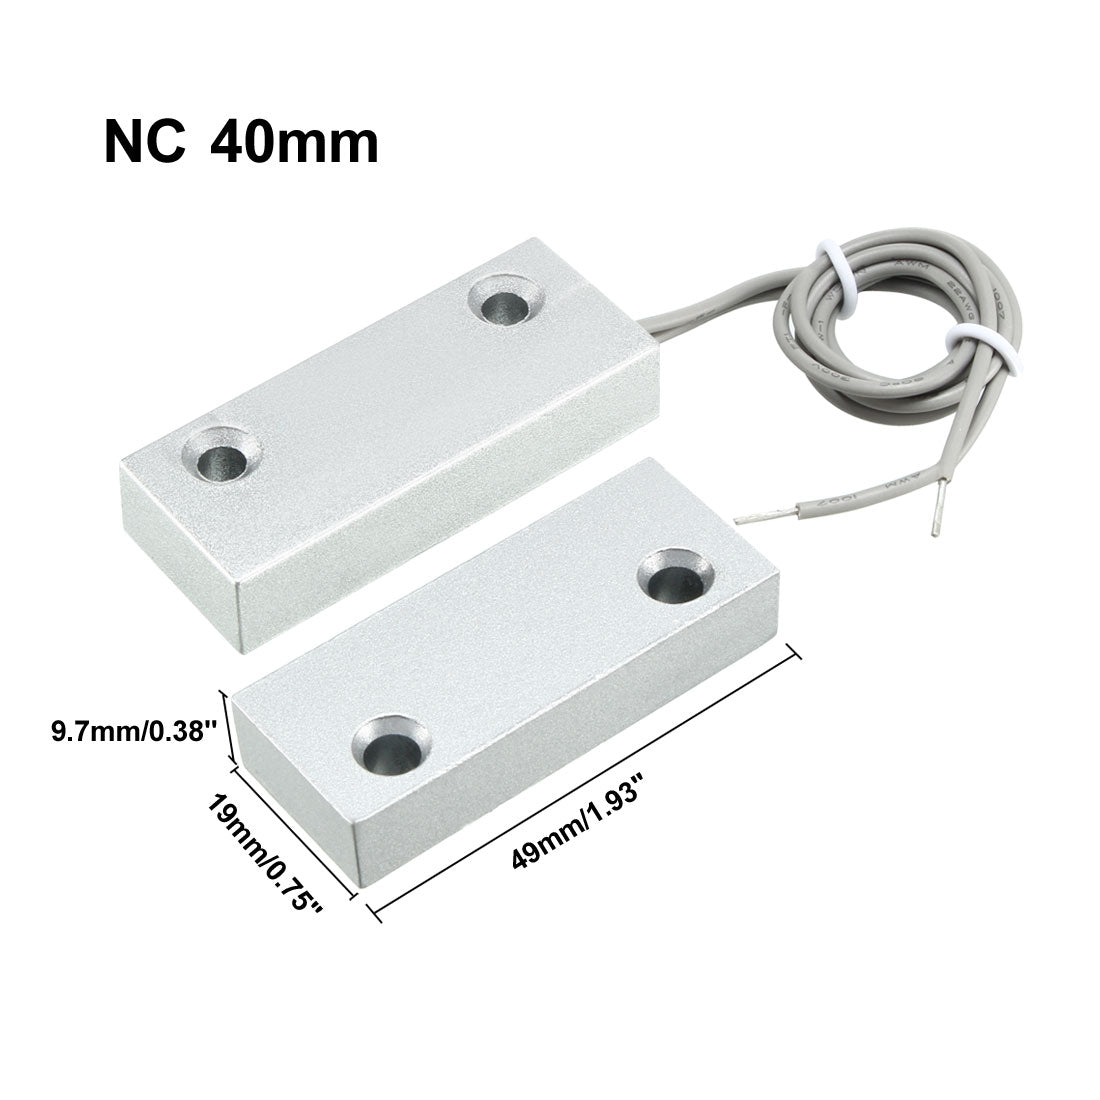 uxcell Uxcell MC-59 NC Alarm Security Rolling Gate Garage Door Contact Magnetic Reed Switch Silver Gray